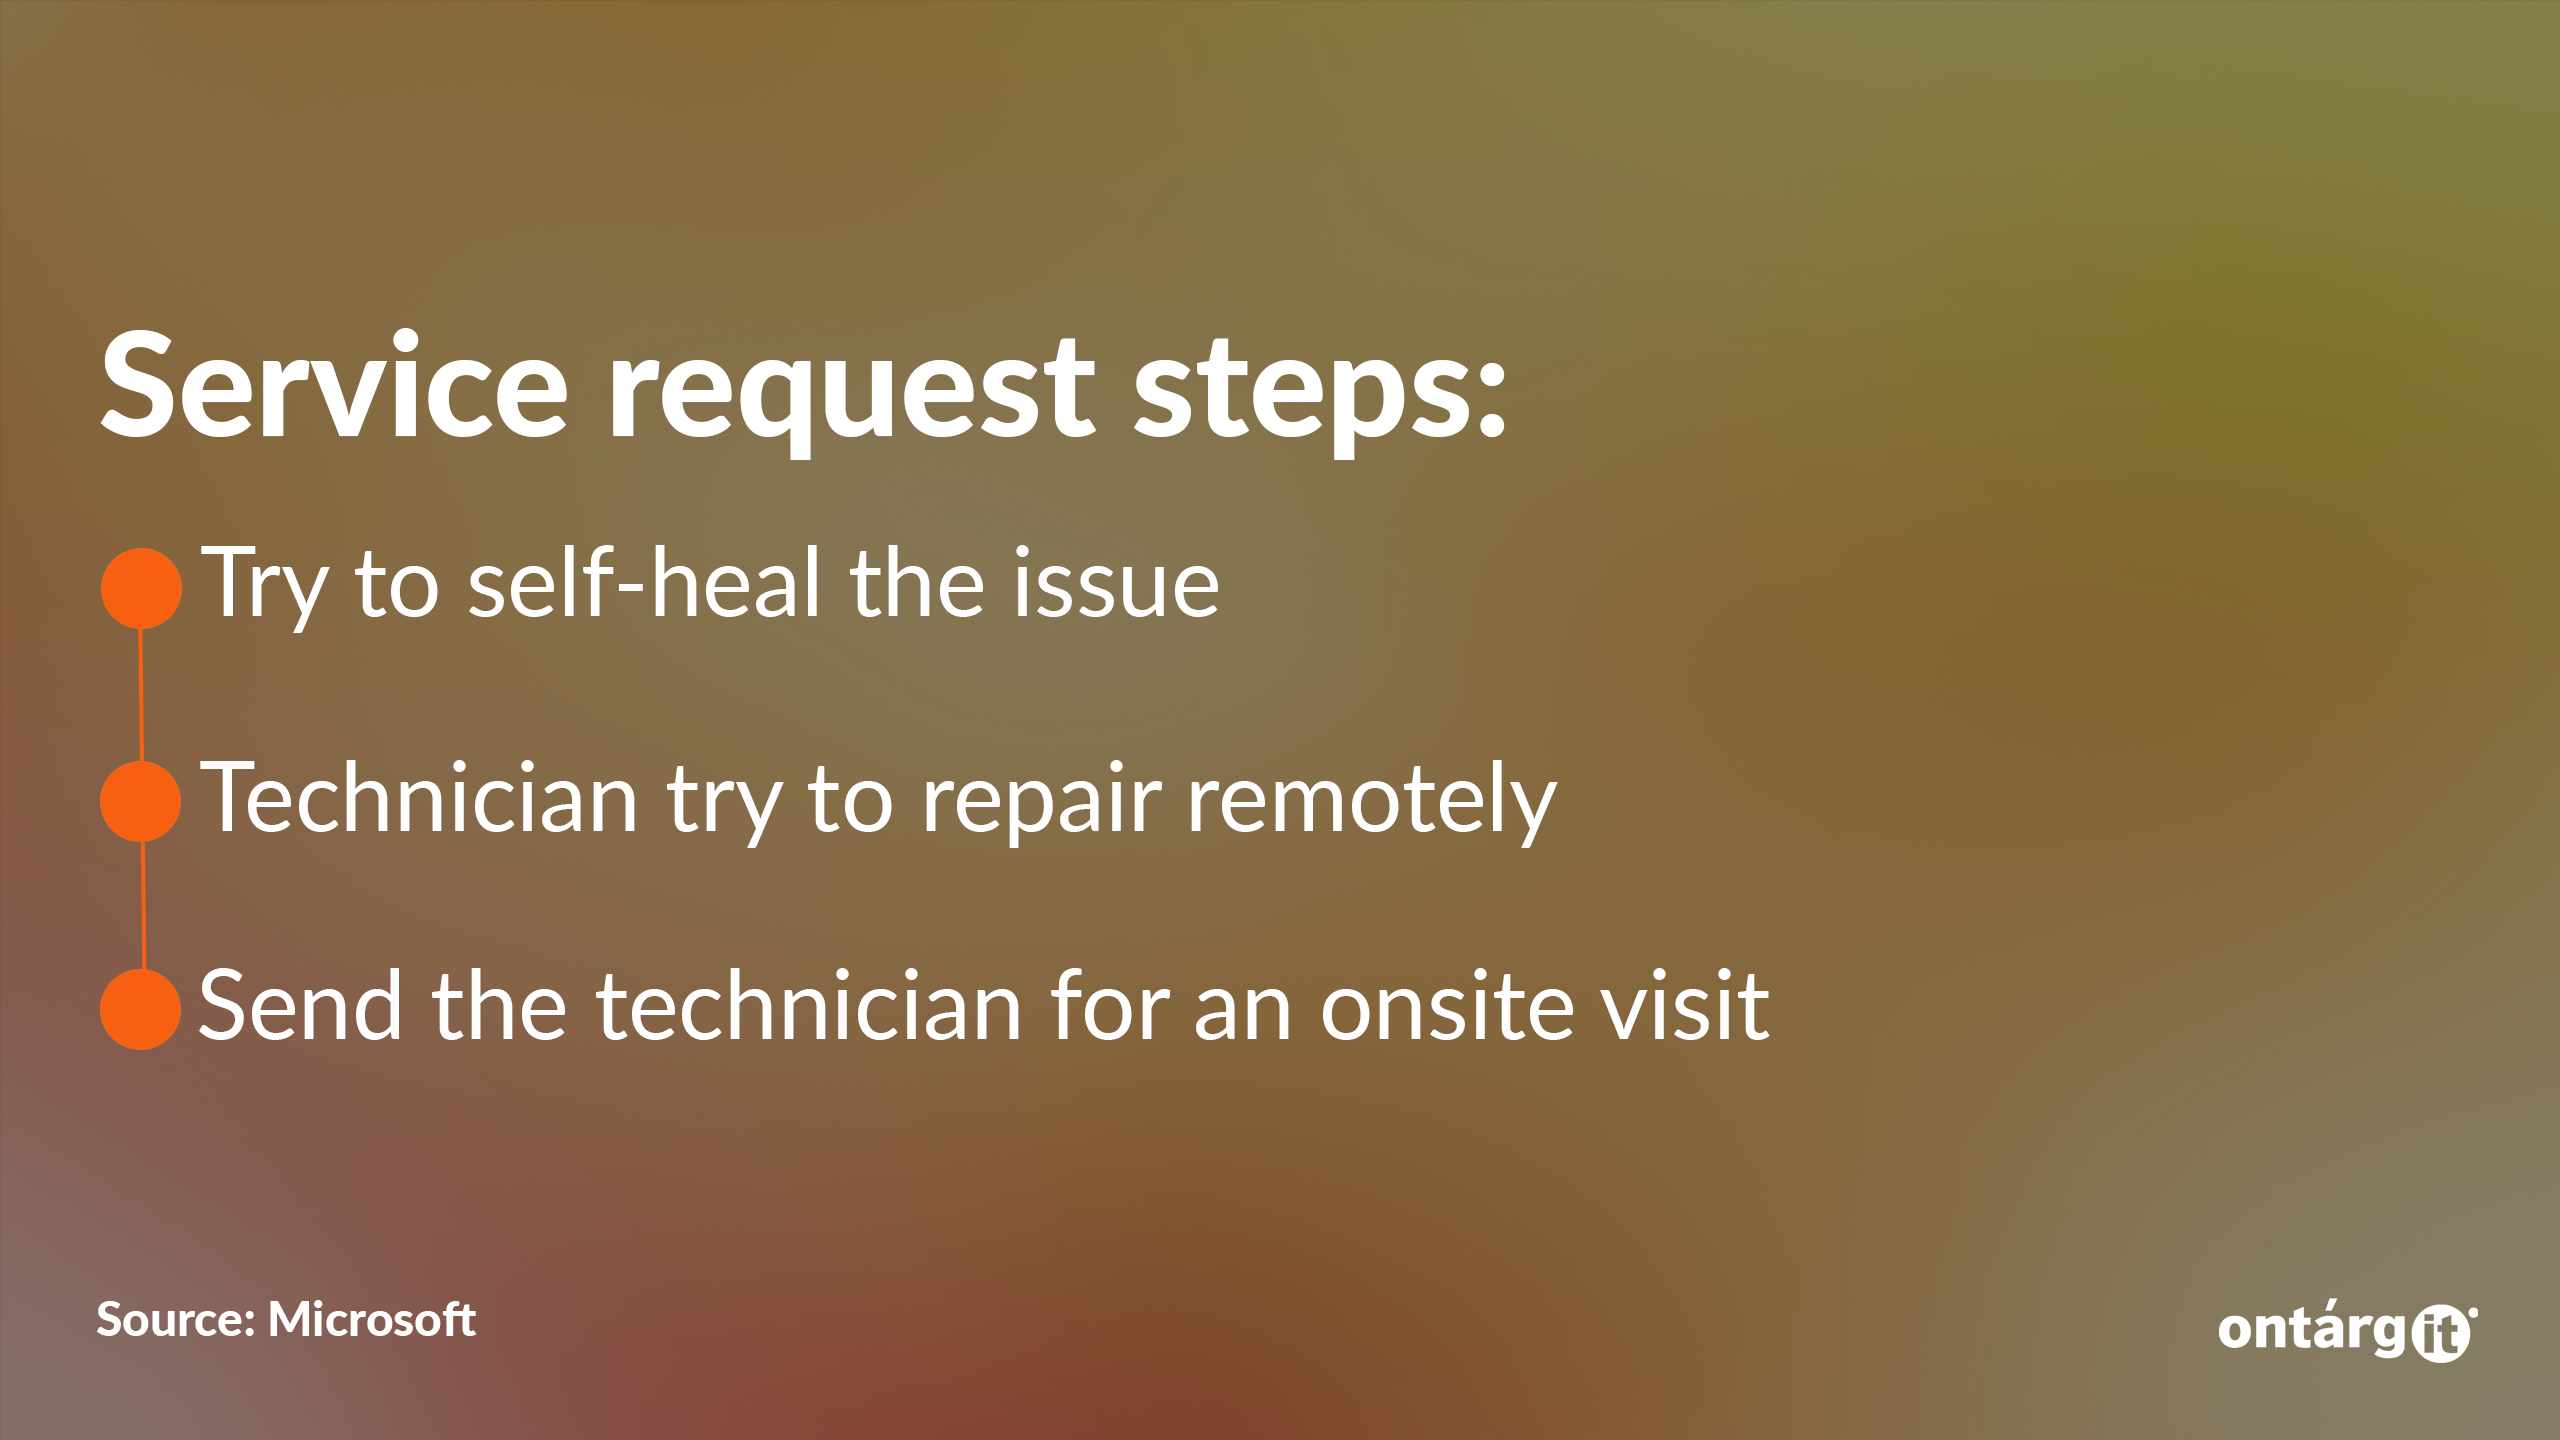 Service request steps: 1. Try to self-heal the issue 2. Technician try to repair remotely 3. Sending the technician for an onsite visit